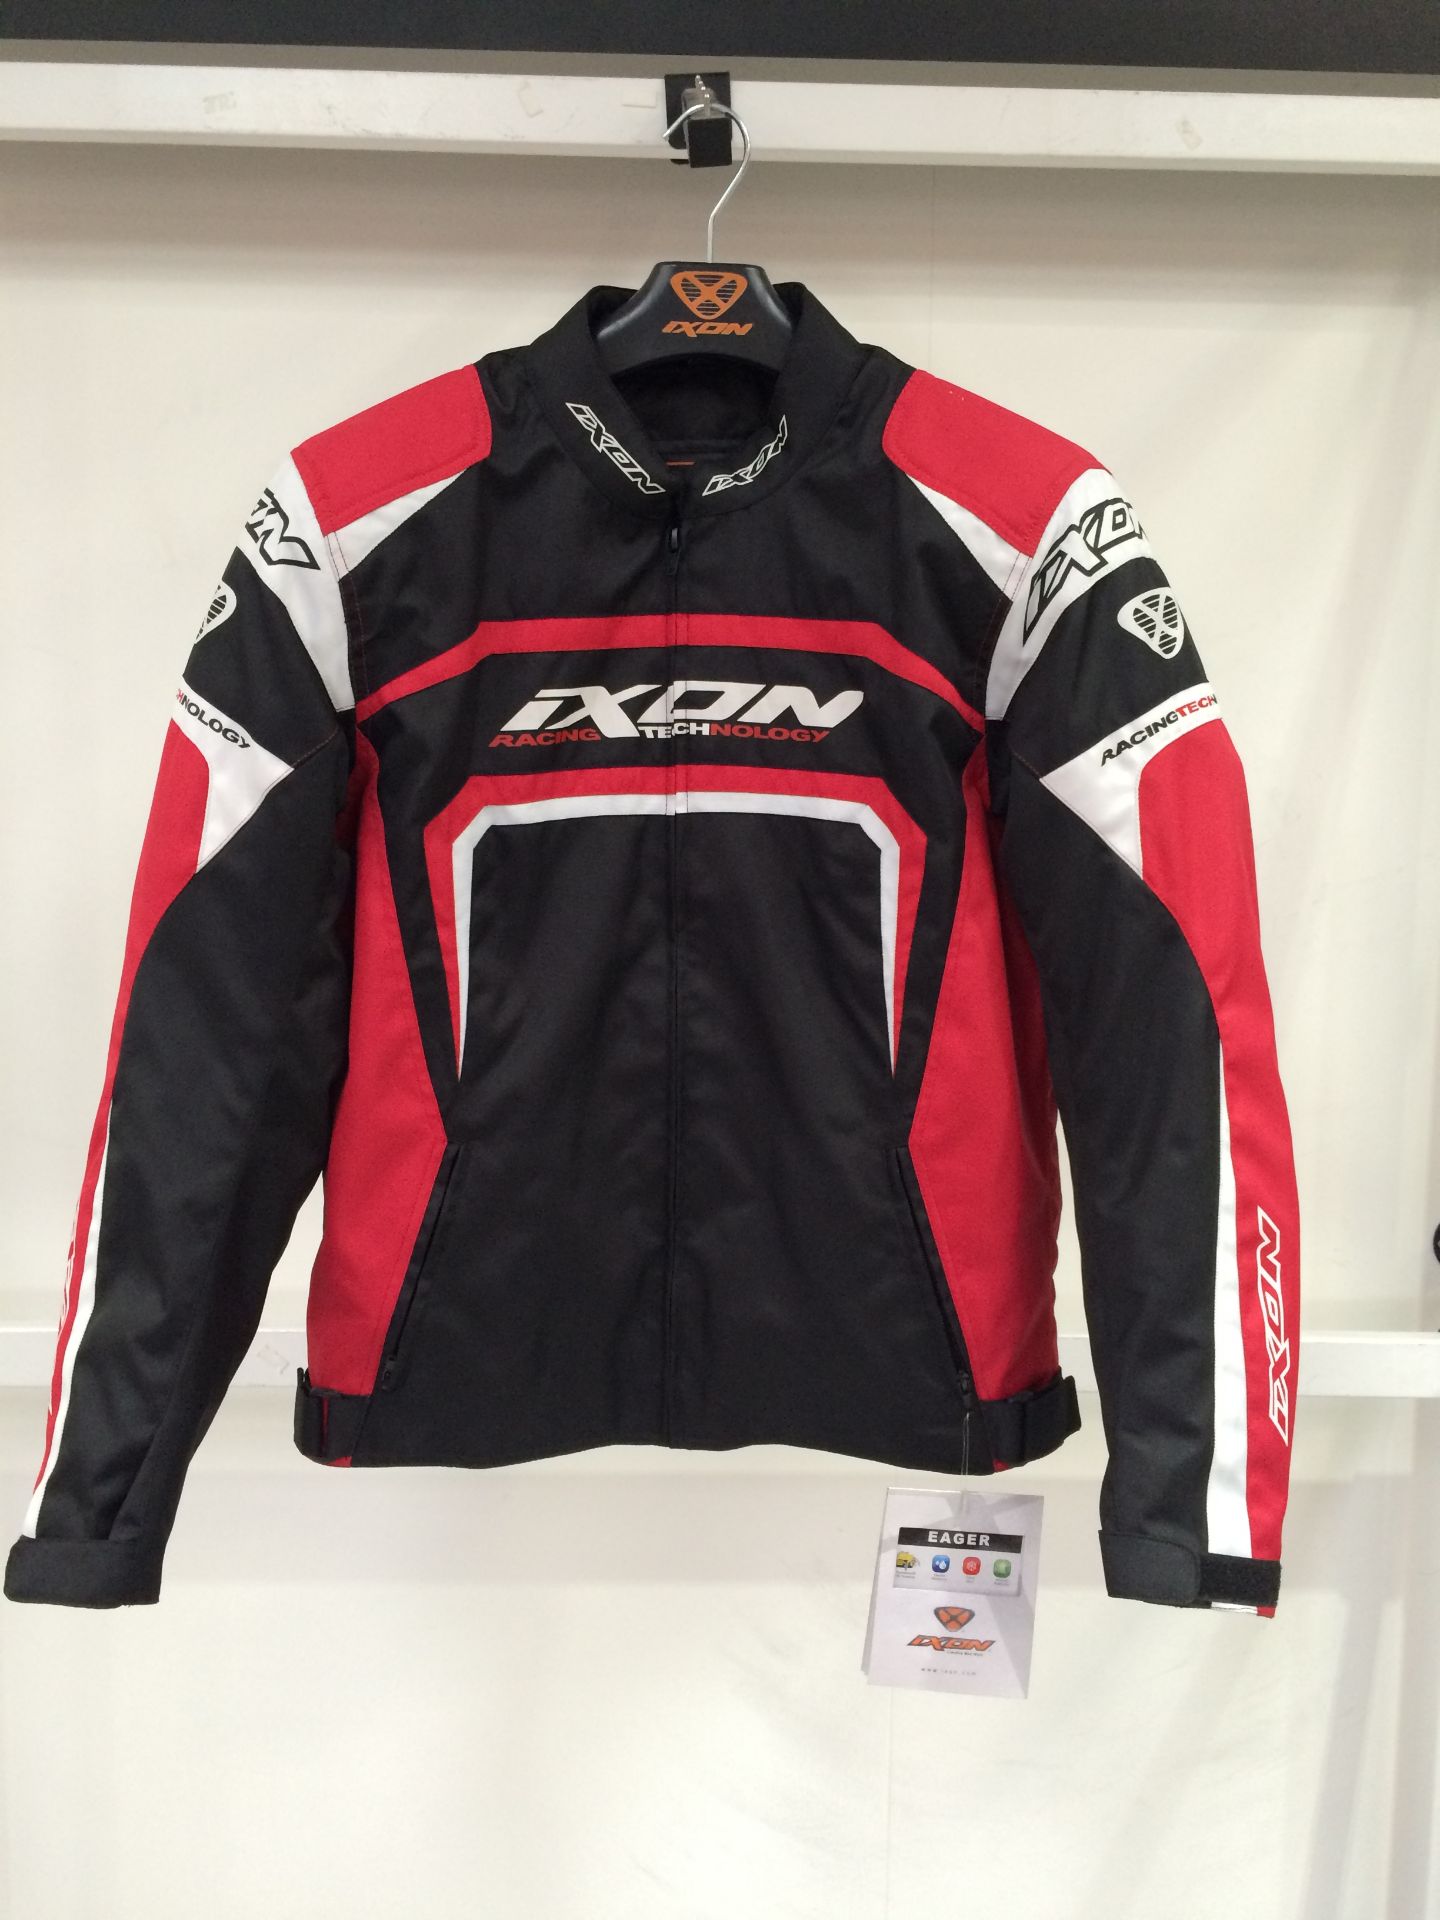 Ixon Eager Jacket. (Red) Size XL